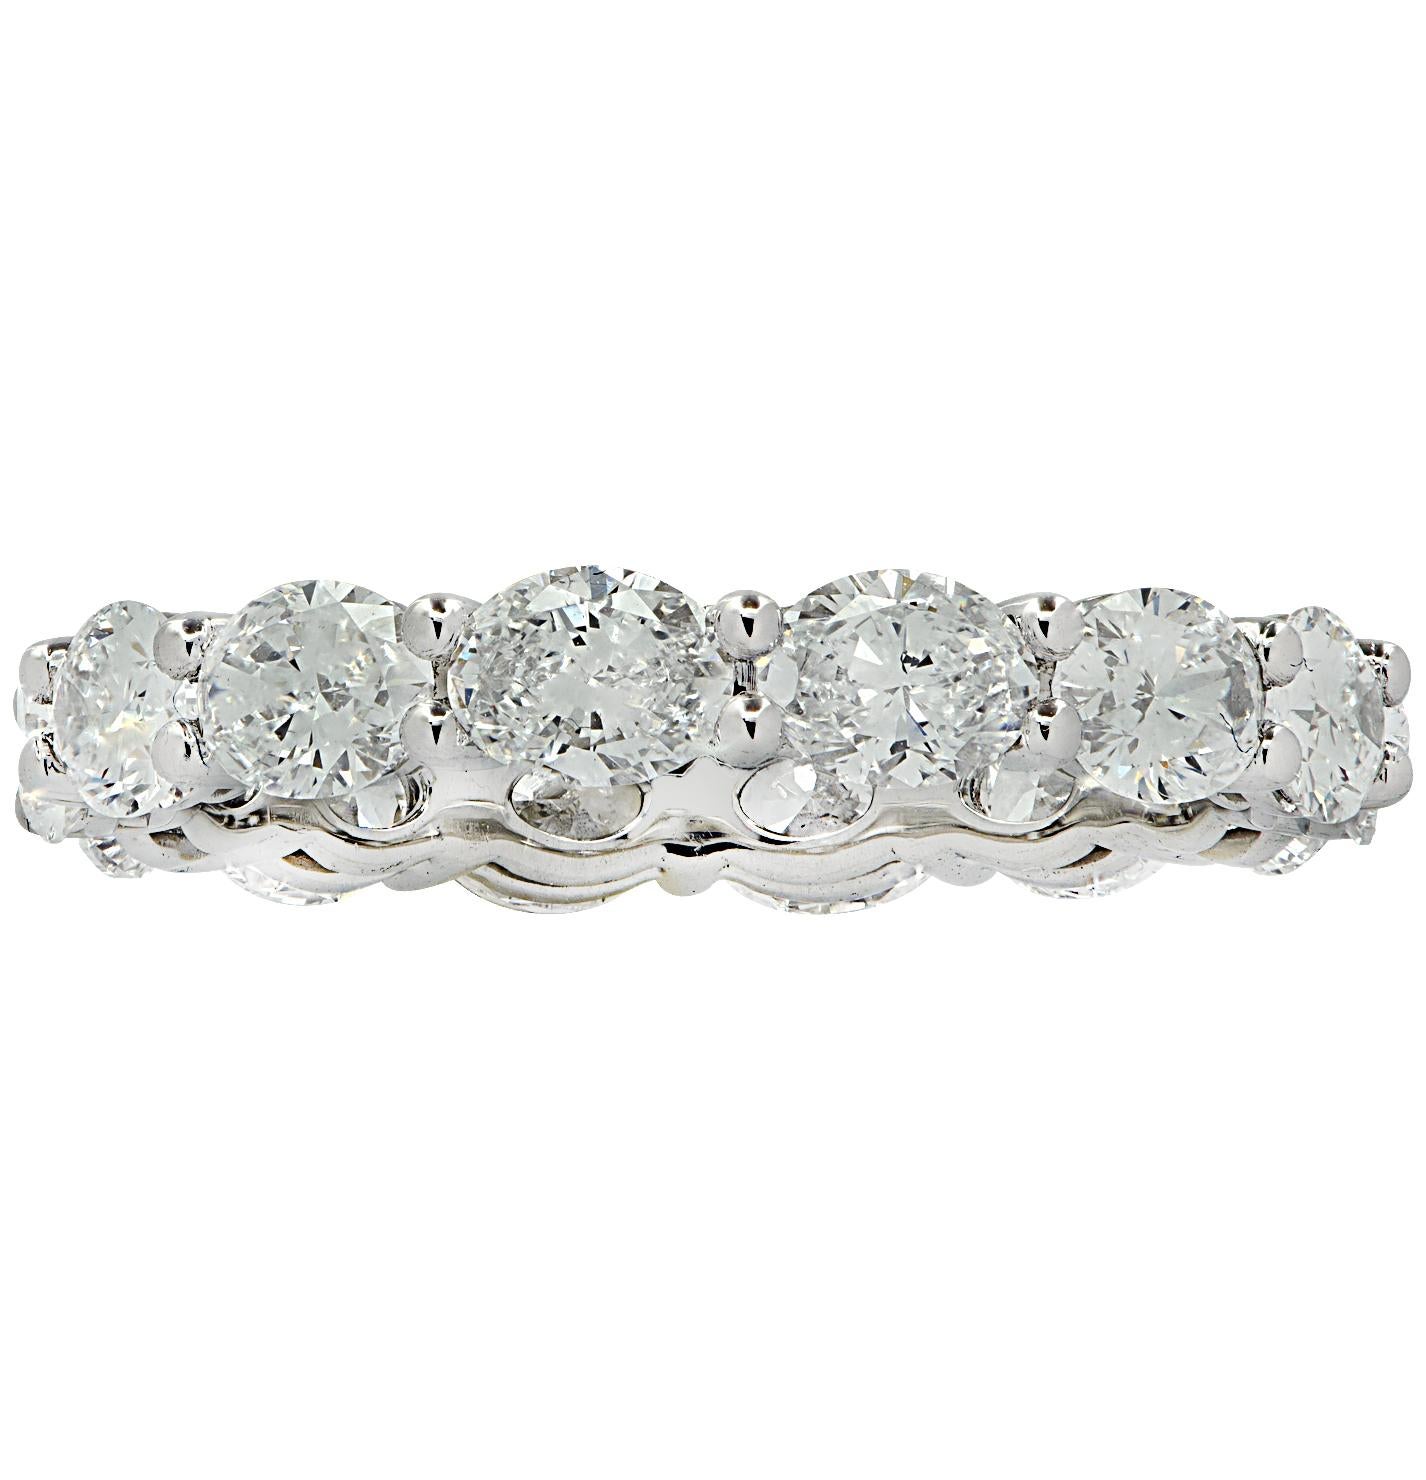 Stunning Vivid Diamonds Eat-West Eternity Band crafted in Platinum, featuring 14 oval cut diamonds weighing 2.69 carats total, D-E color, VVS clarity. These fine diamonds are seamlessly set, east-west, in a modern take on the classic eternity band,